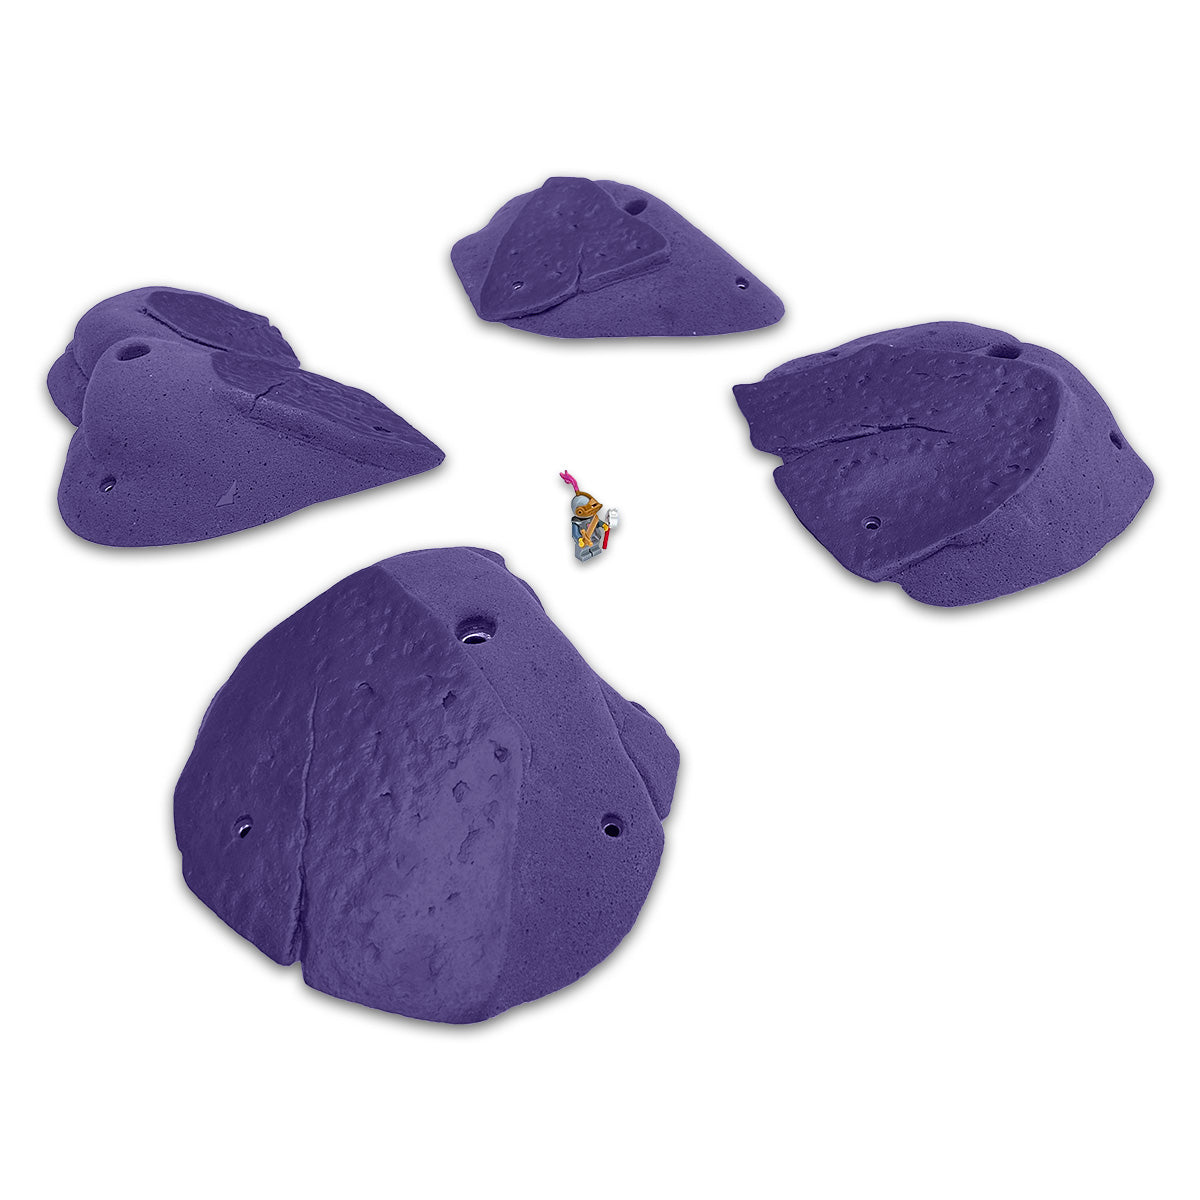 Four large purple crimps, with a natural dual texture of high friction to low friction. Featuring a lego character in the middle to reference the scale of the PU holds.